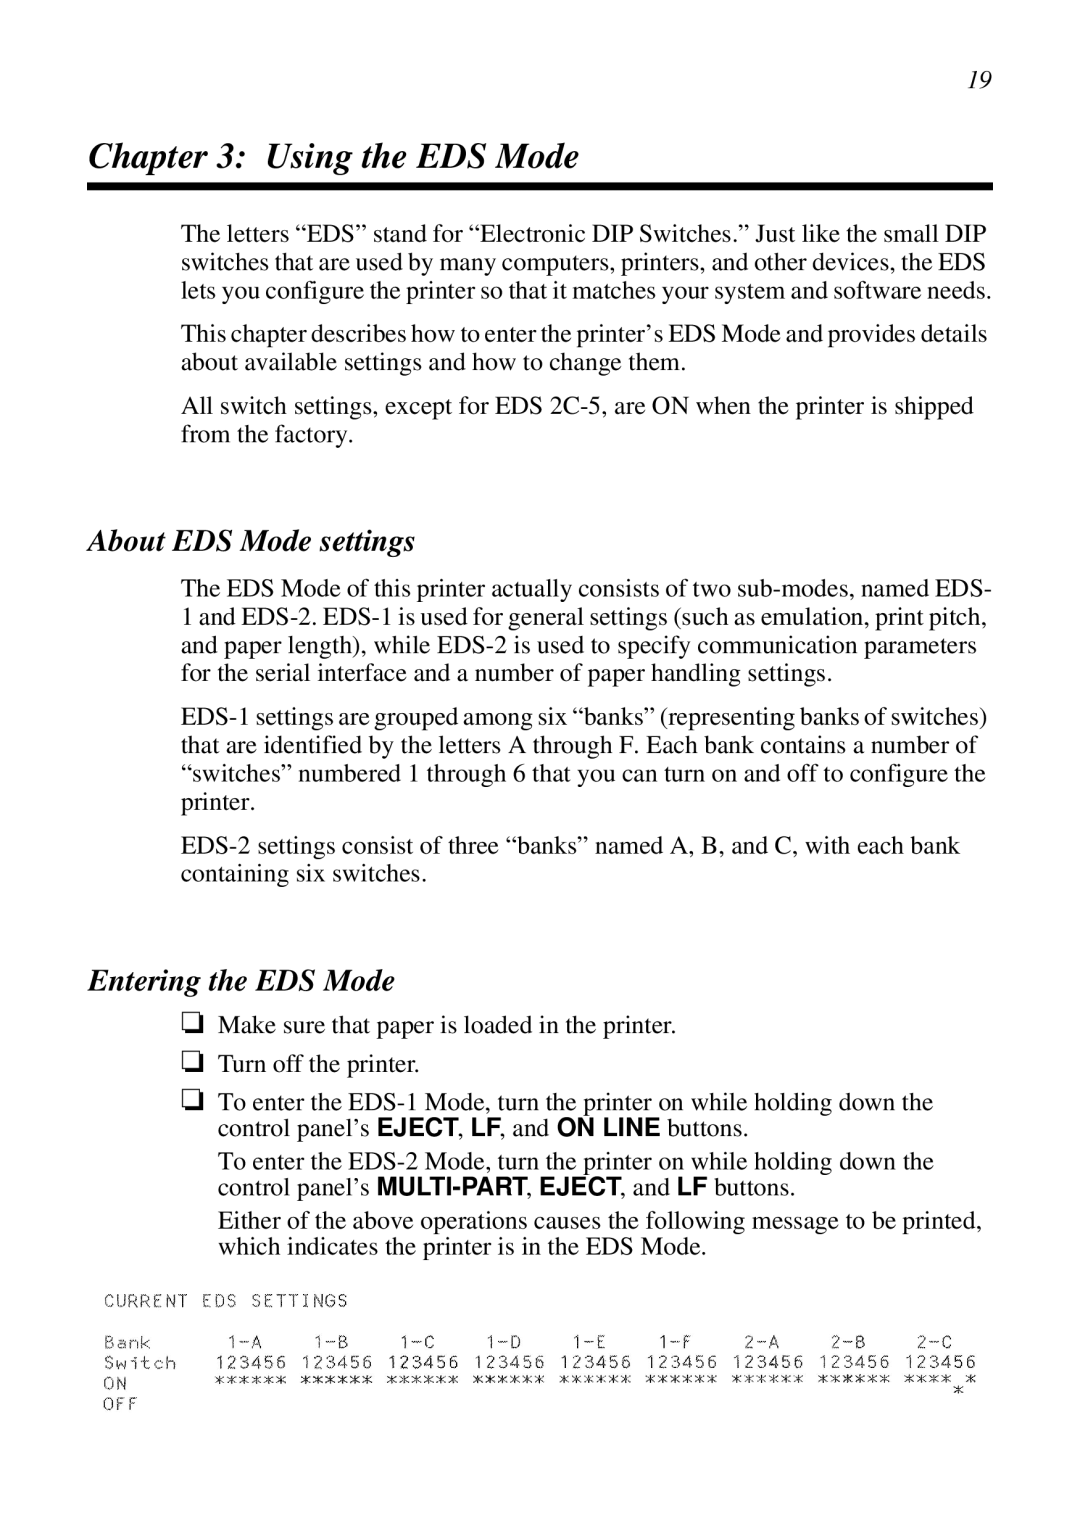 Star Micronics LC-8021 manual Using the EDS Mode, About EDS Mode settings, Entering the EDS Mode 